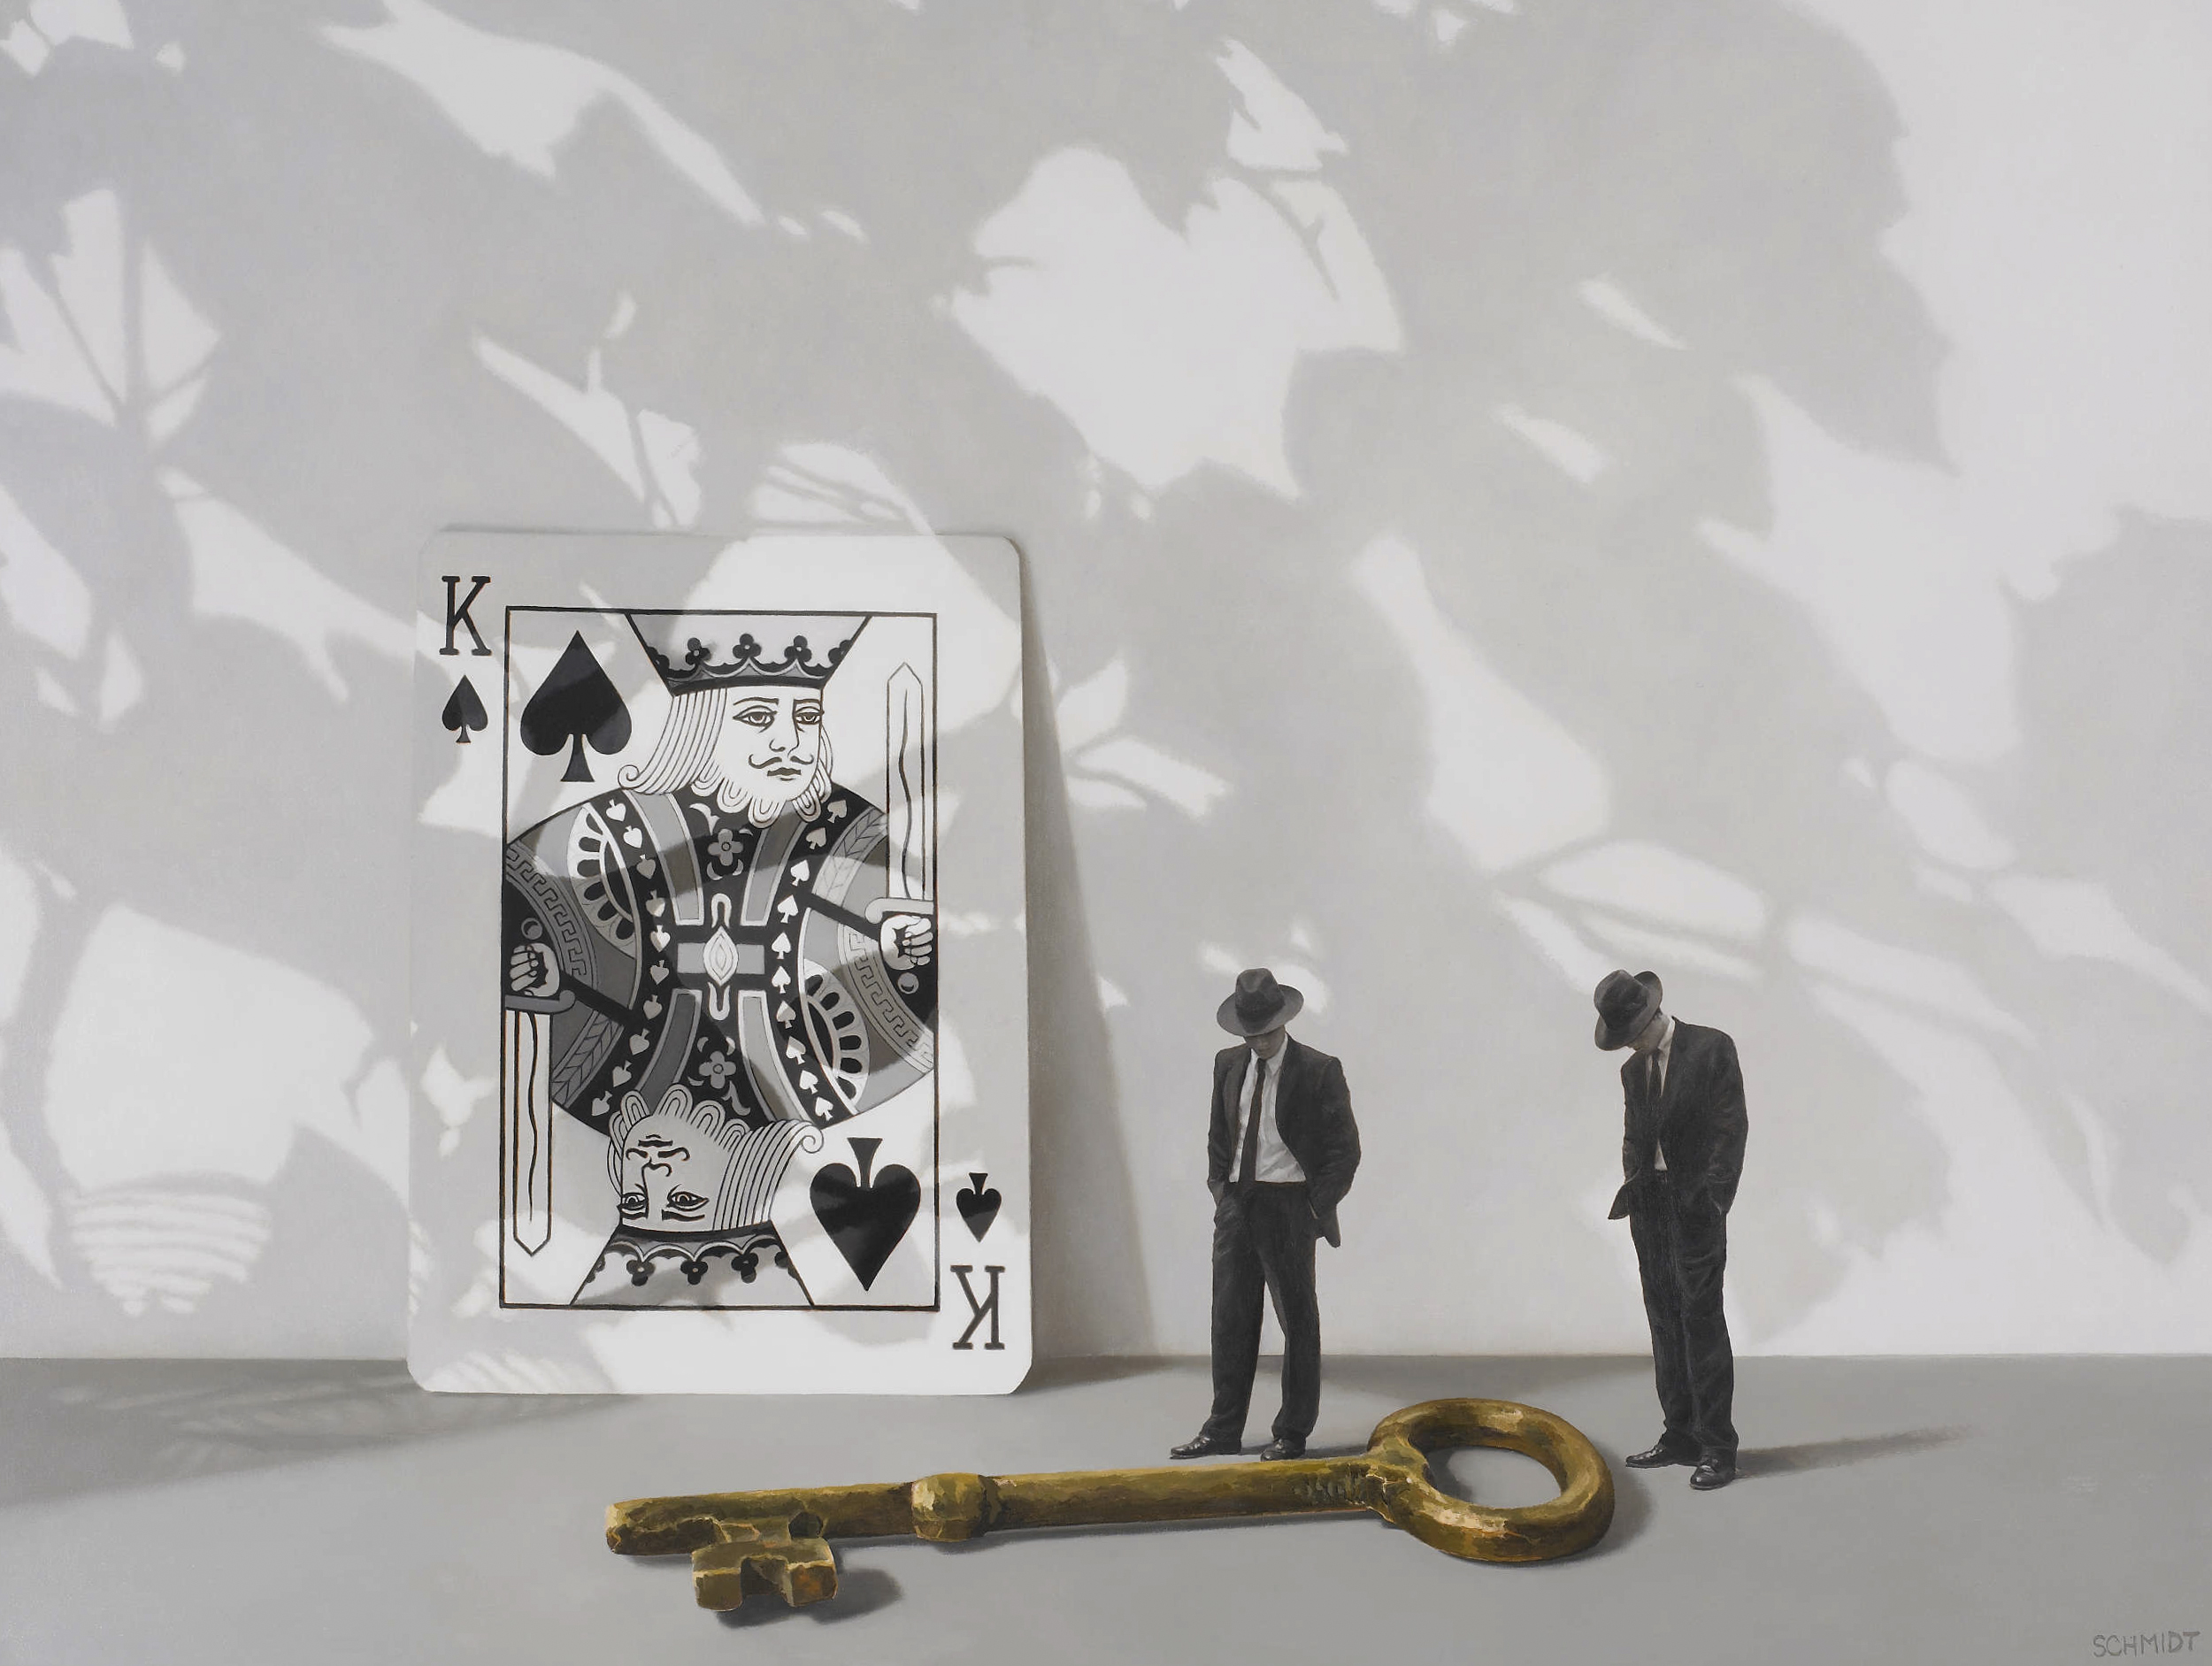 playing card ,king of hearts, giant brass key, detectives ( diminutive men in suits) wearing fedora hats , shadow on the wall cast by unseen flowers ,only the key is in color, the rest in black and white